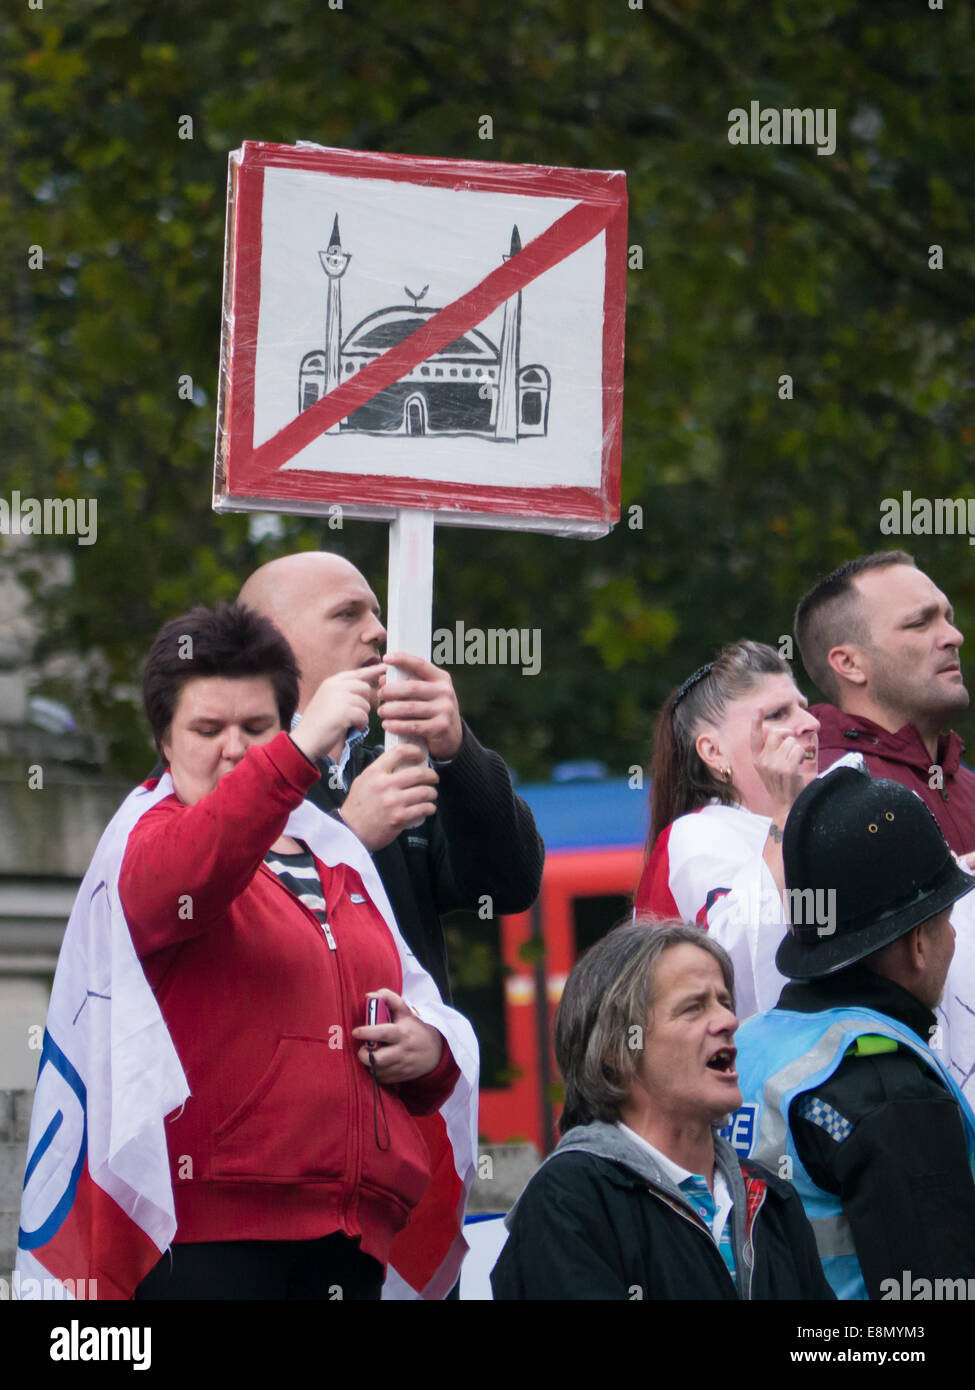 A member of the English Defence League holds a sign showing a mosque with a line drawn through it during a protest against a Muslim School that is due to open in Portsmouth, England Stock Photo